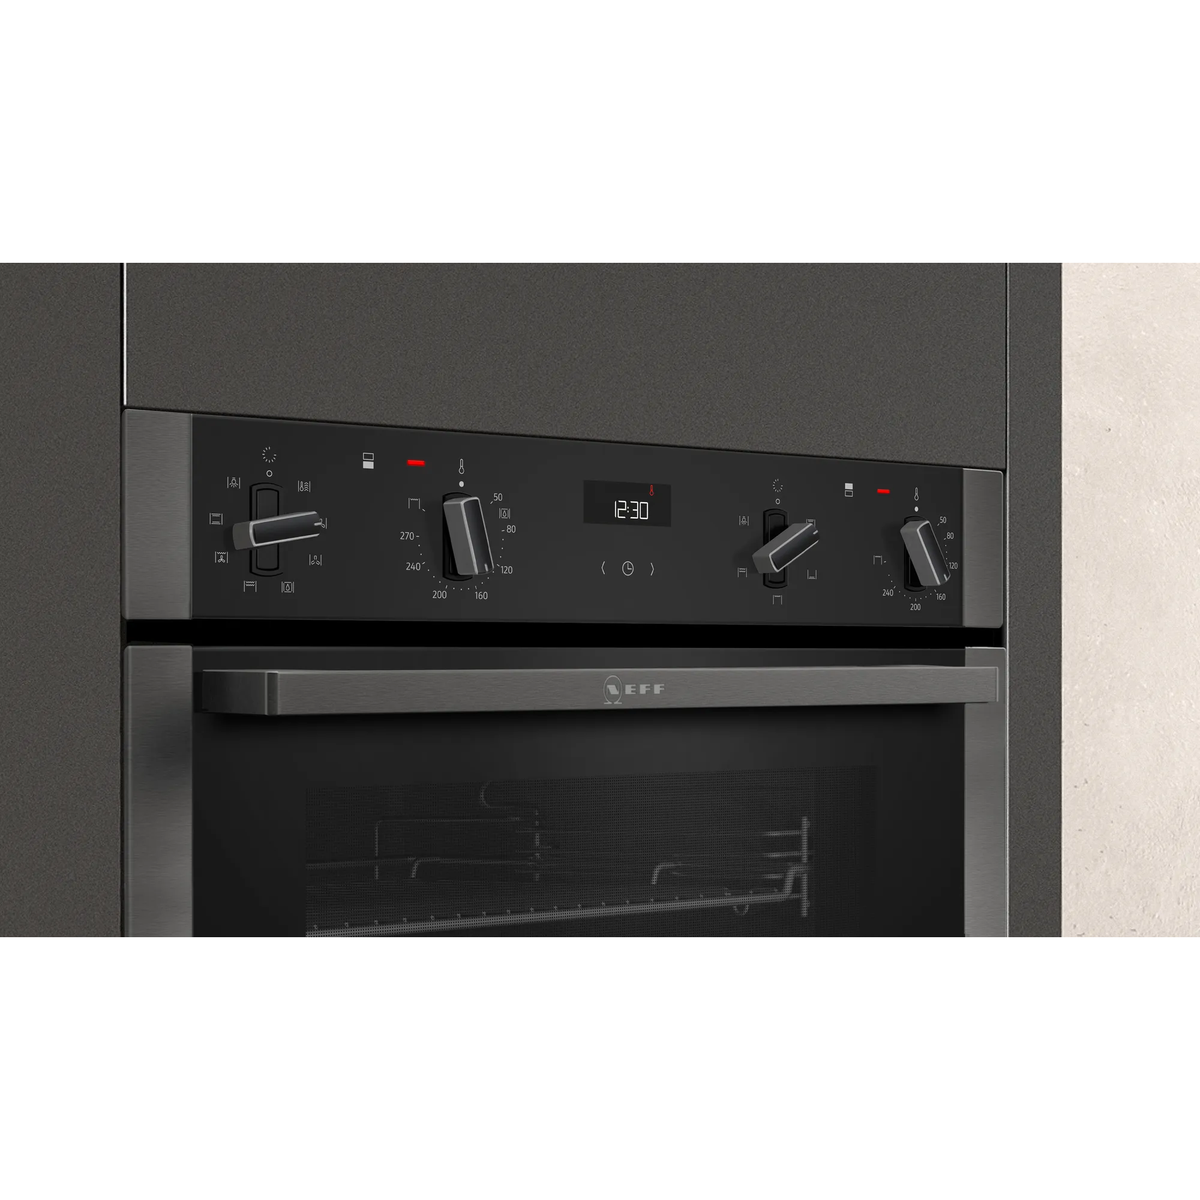 Neff N50 Built-In Electric Double Oven - Graphite Grey | U1ACE2HG0B (7594997285052)